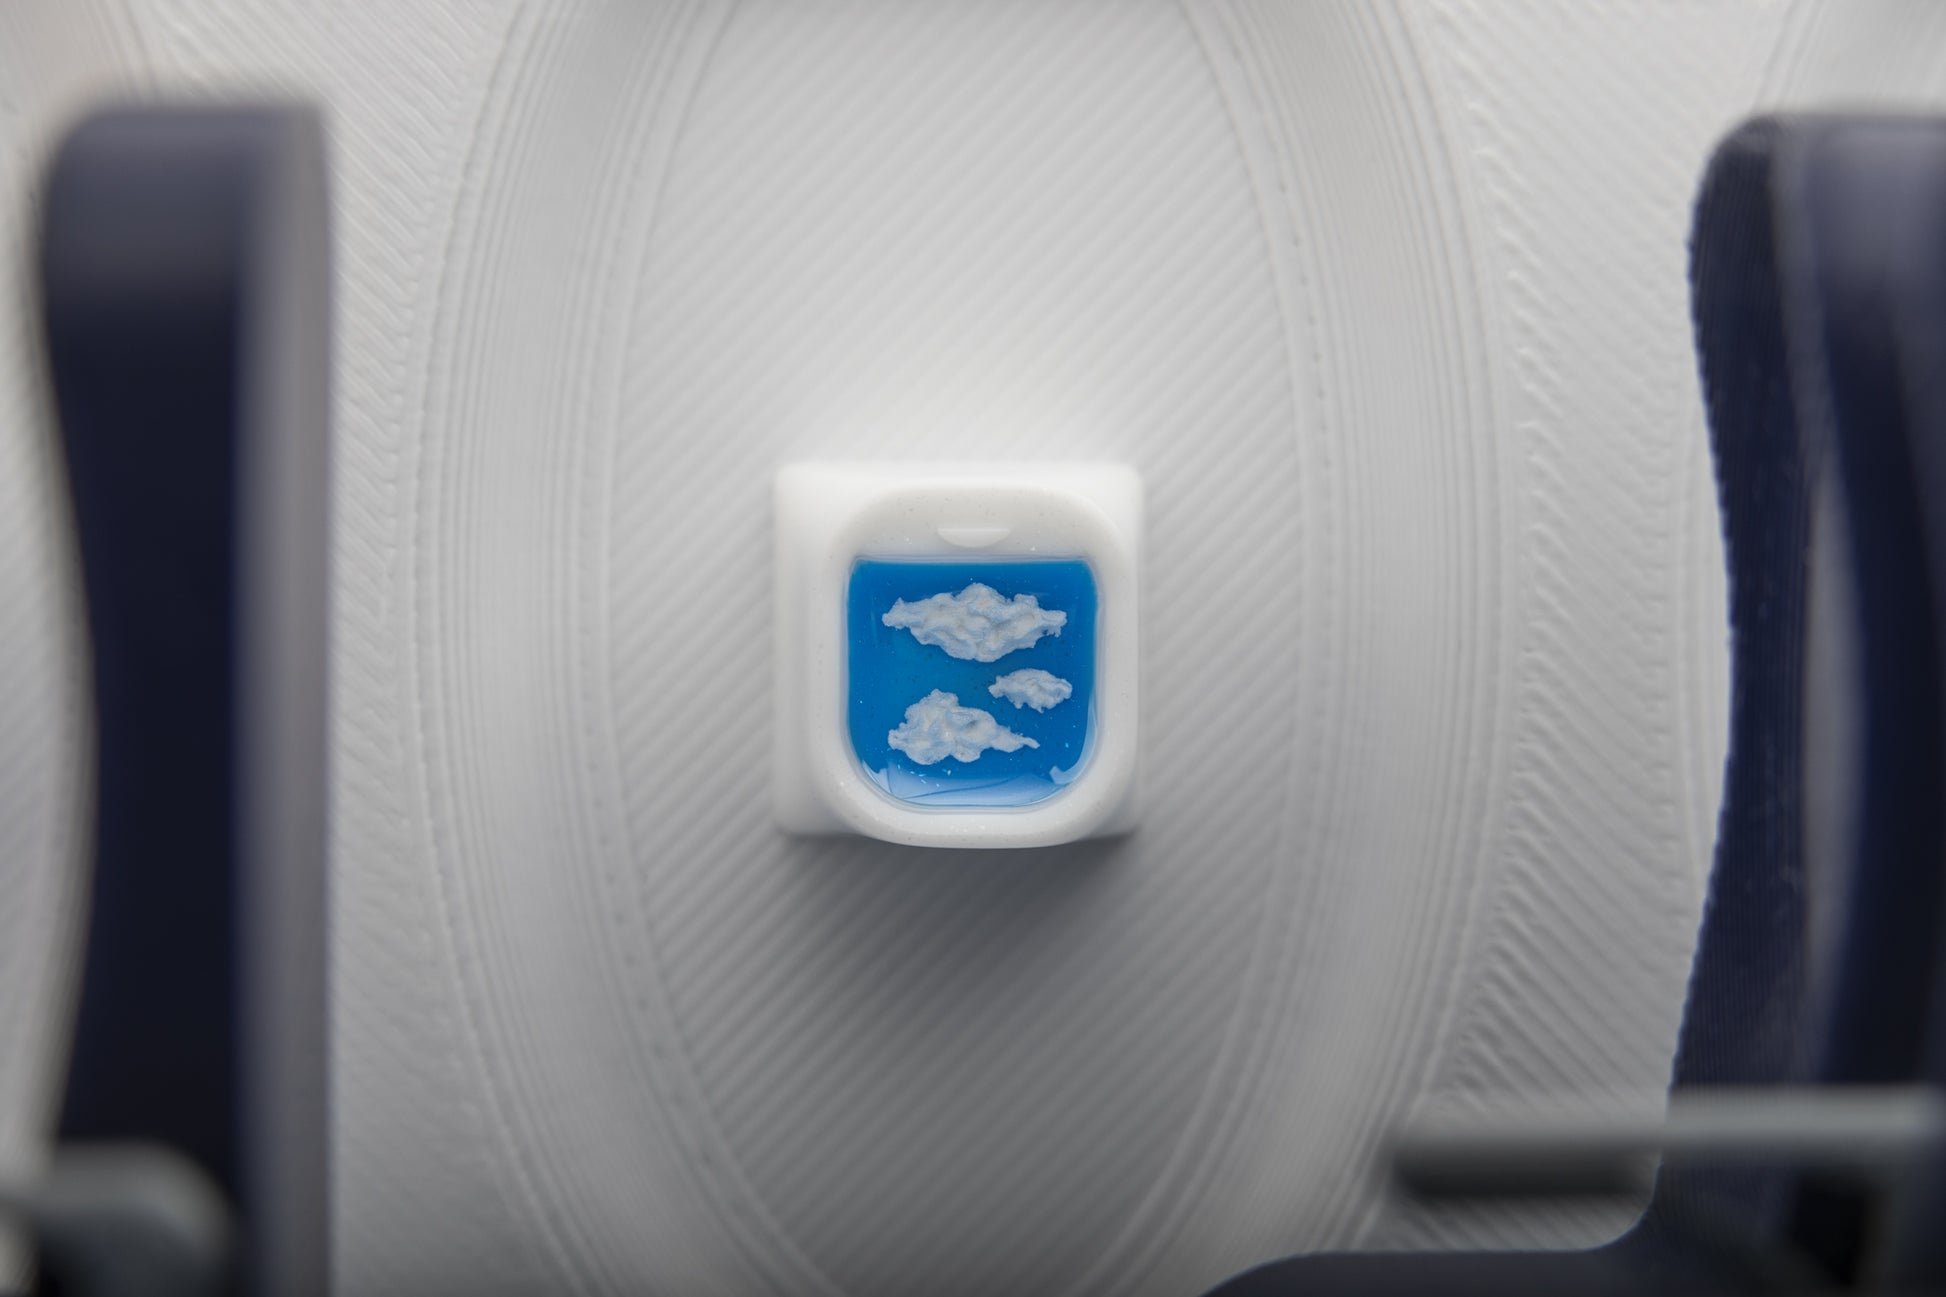 airplane window artisan keycap with clouds, view inside airplane